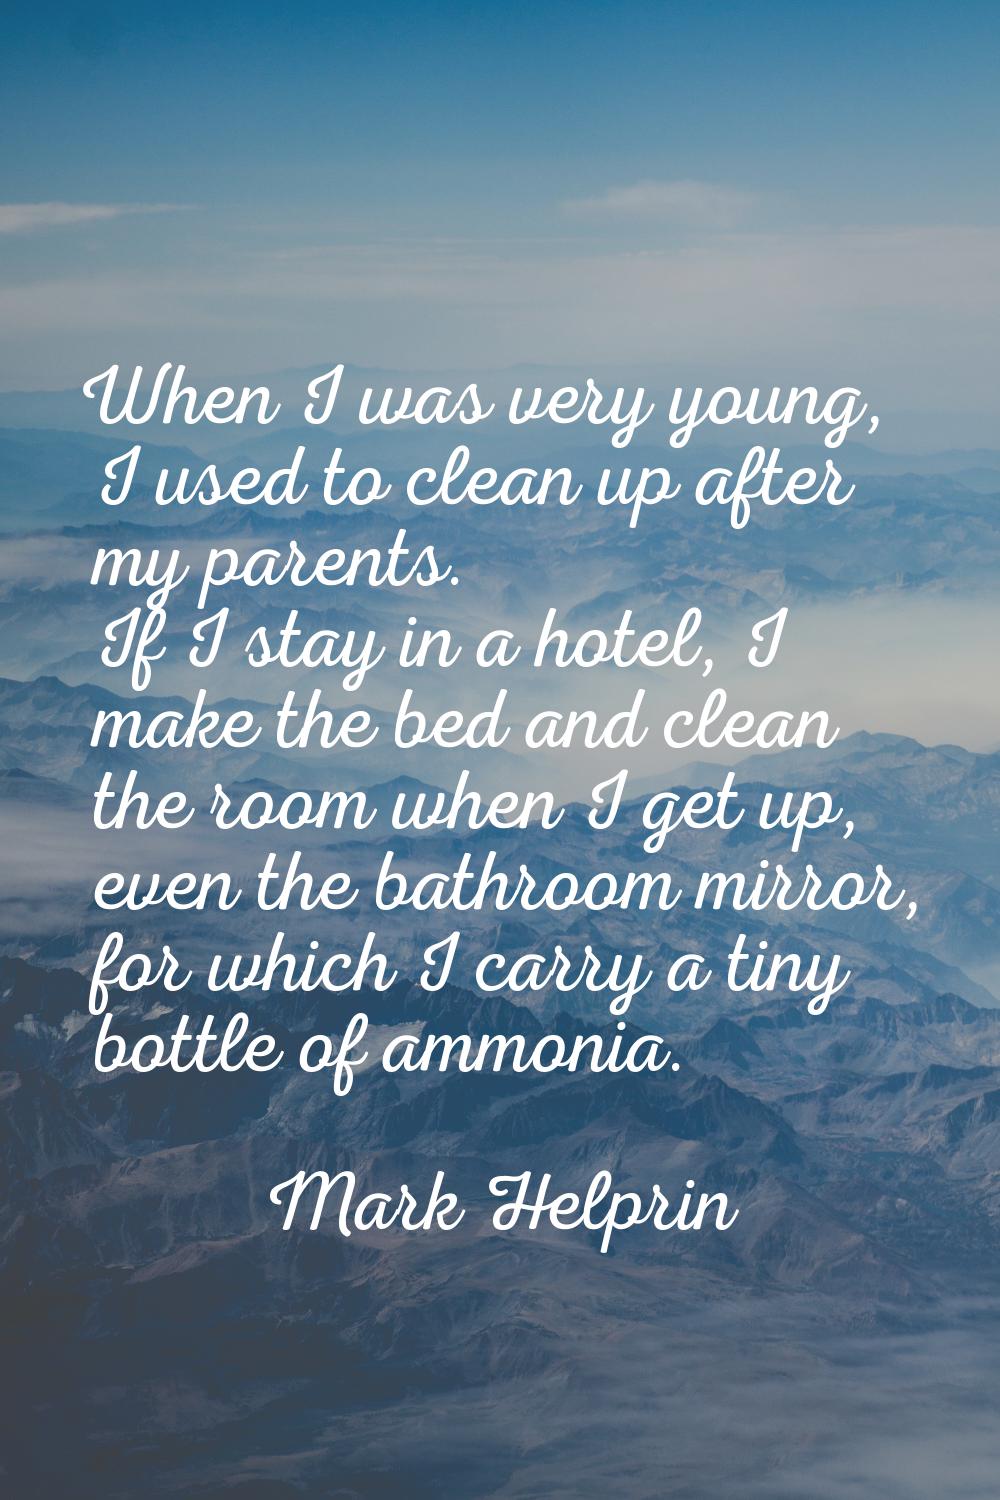 When I was very young, I used to clean up after my parents. If I stay in a hotel, I make the bed an